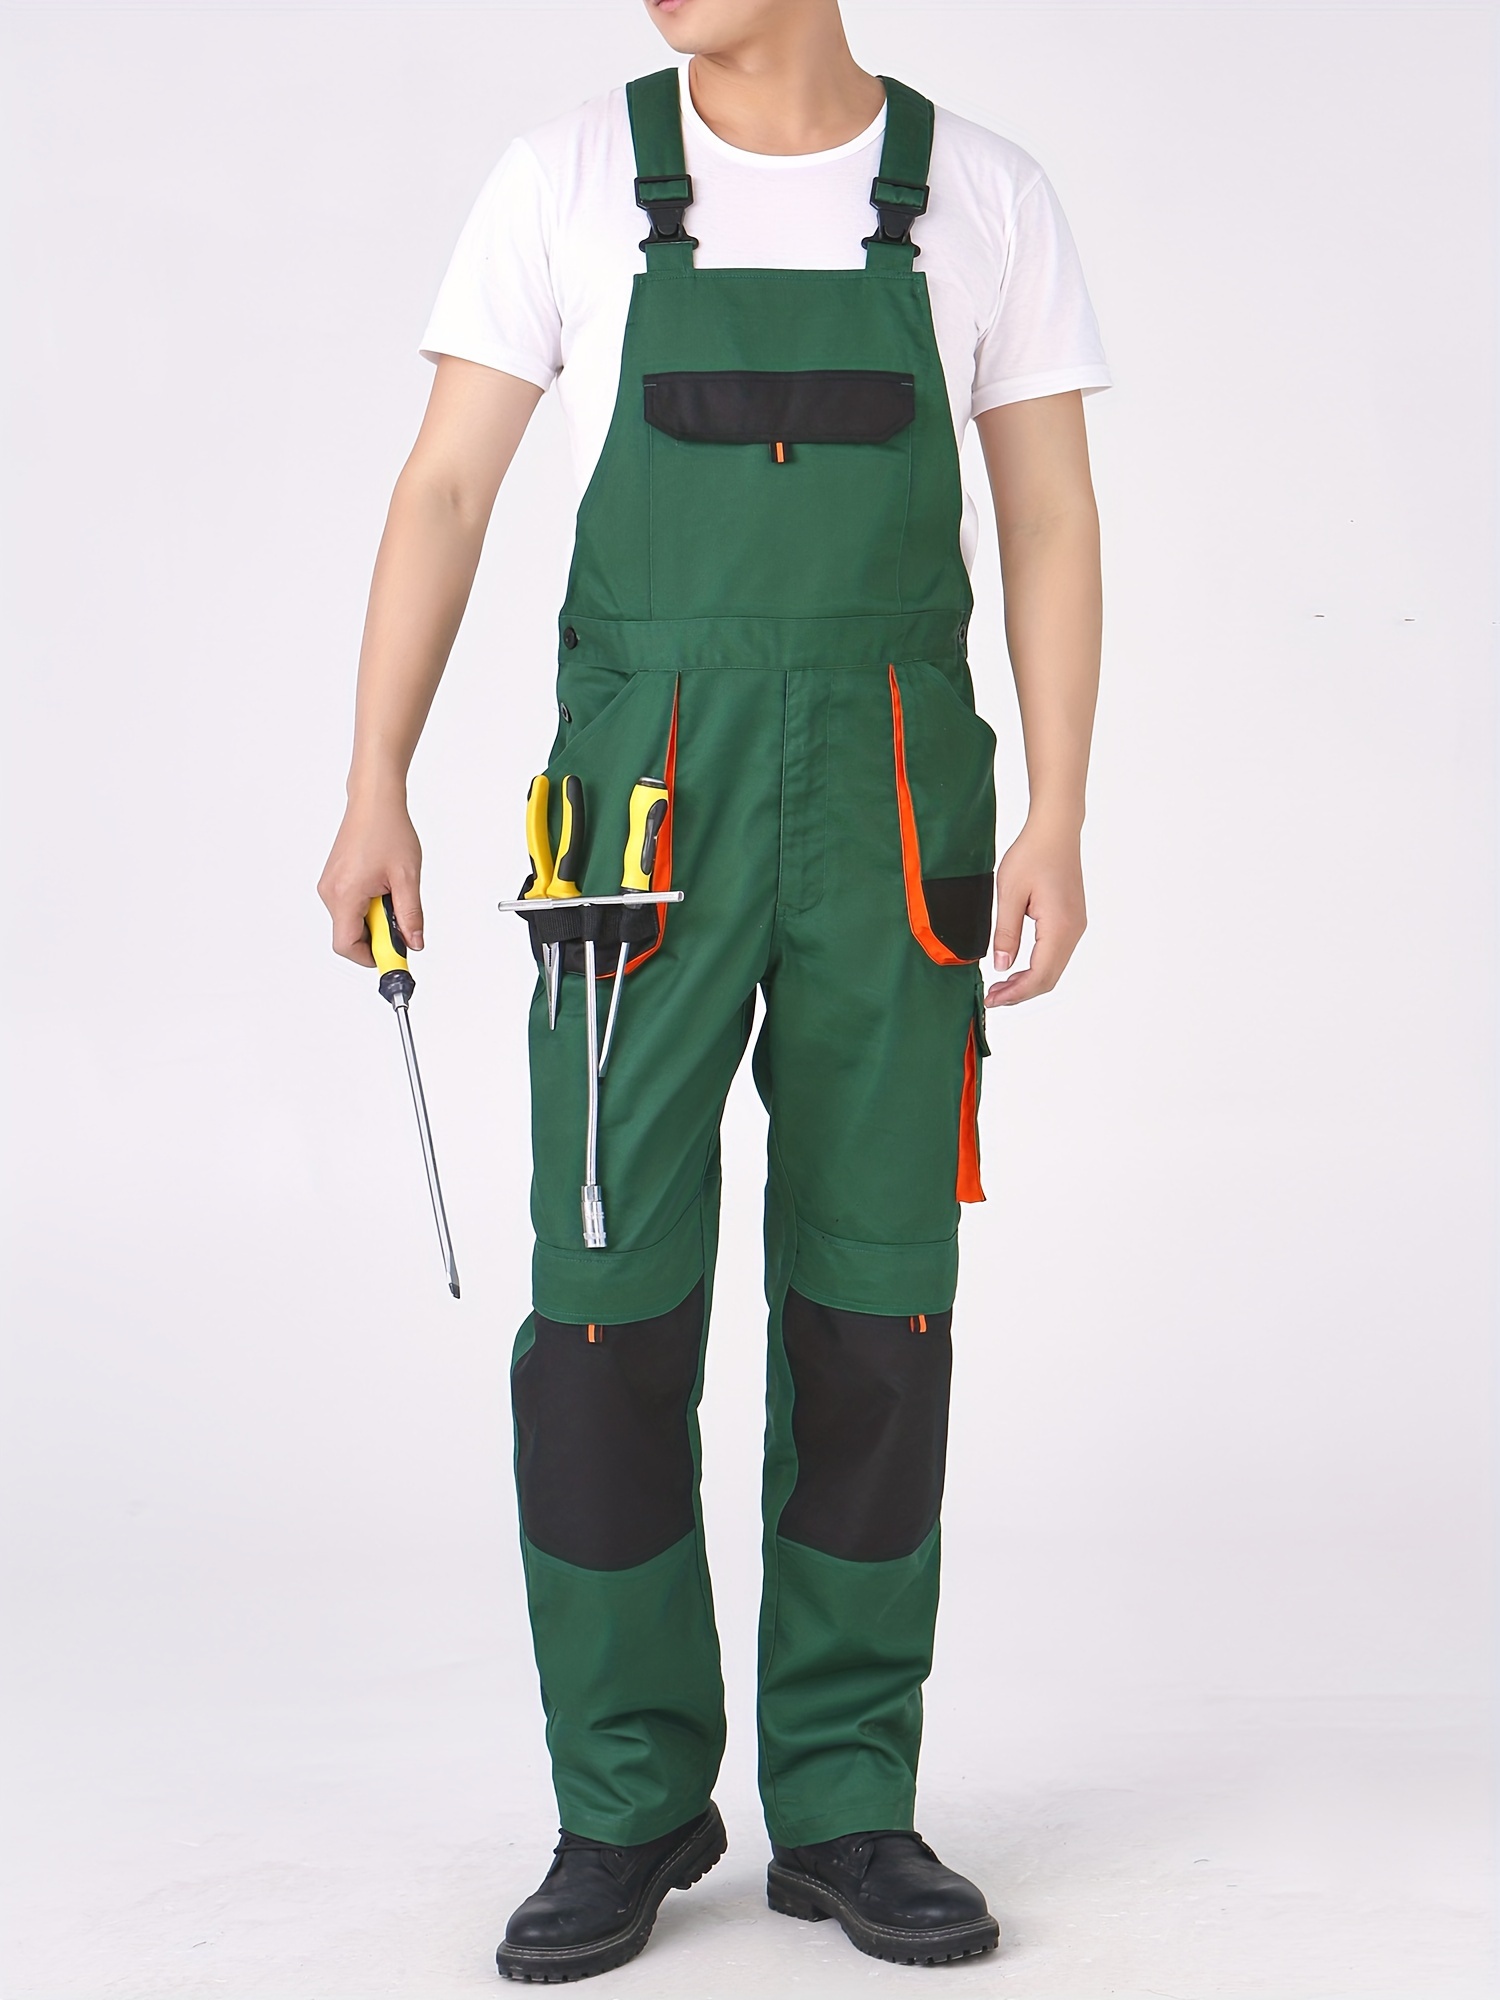 Men's Durable Work Overalls With Multi Pockets, Casual Jumpsuit For Outdoor  Working